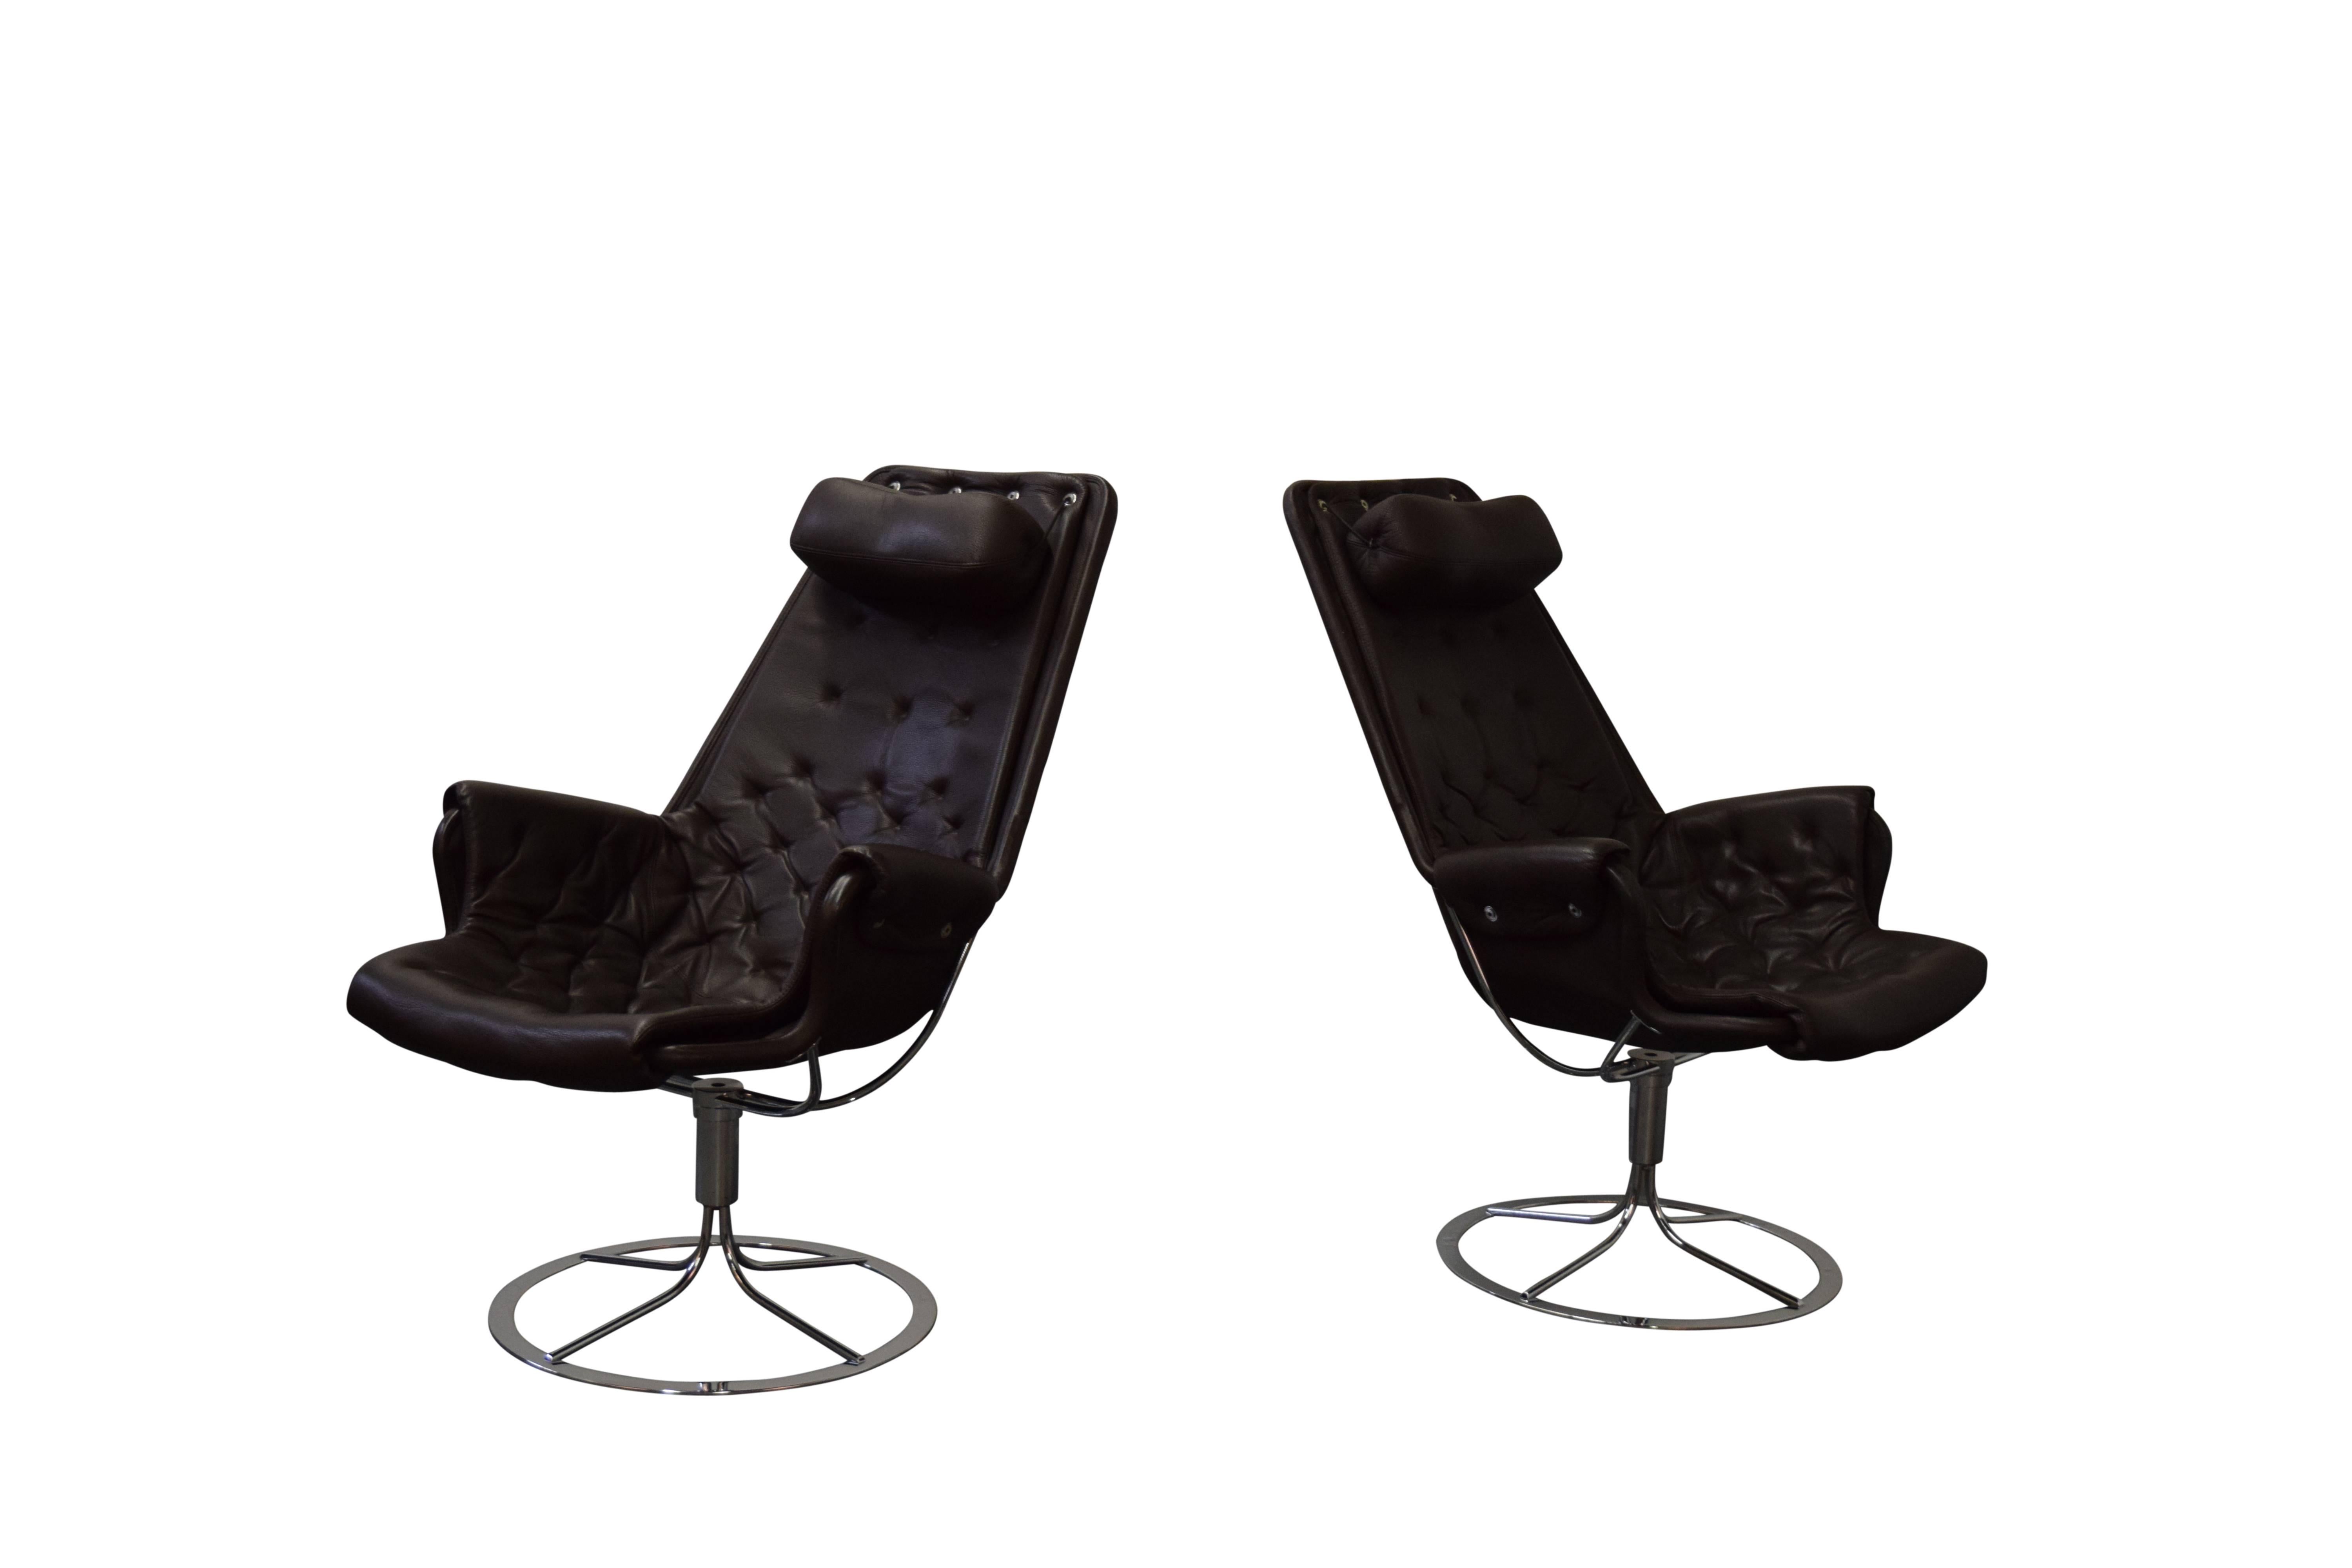 Pair of Bruno Mathsson for DUX Jetson lounge chairs. Chairs are signed and feature original leather upholstery.